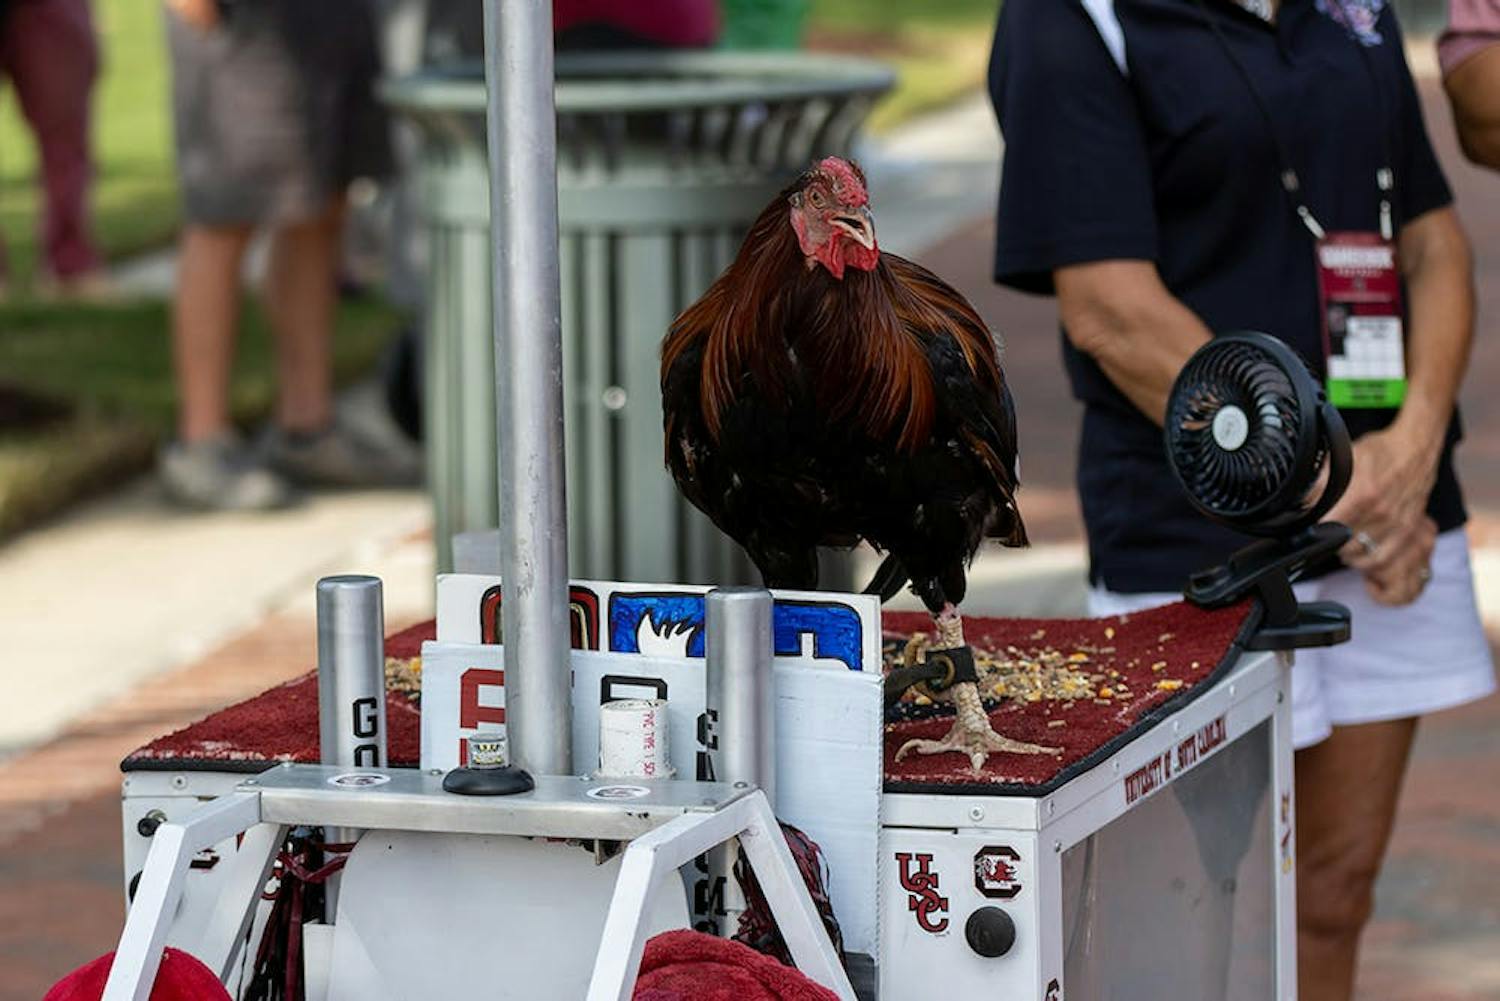 USC's live mascot perches on his robotic tank during the Gamecock Walk on Nov. 6, 2021, in Columbia, S.C. The mascot is now called The General, the university announced on Aug. 29, 2022.